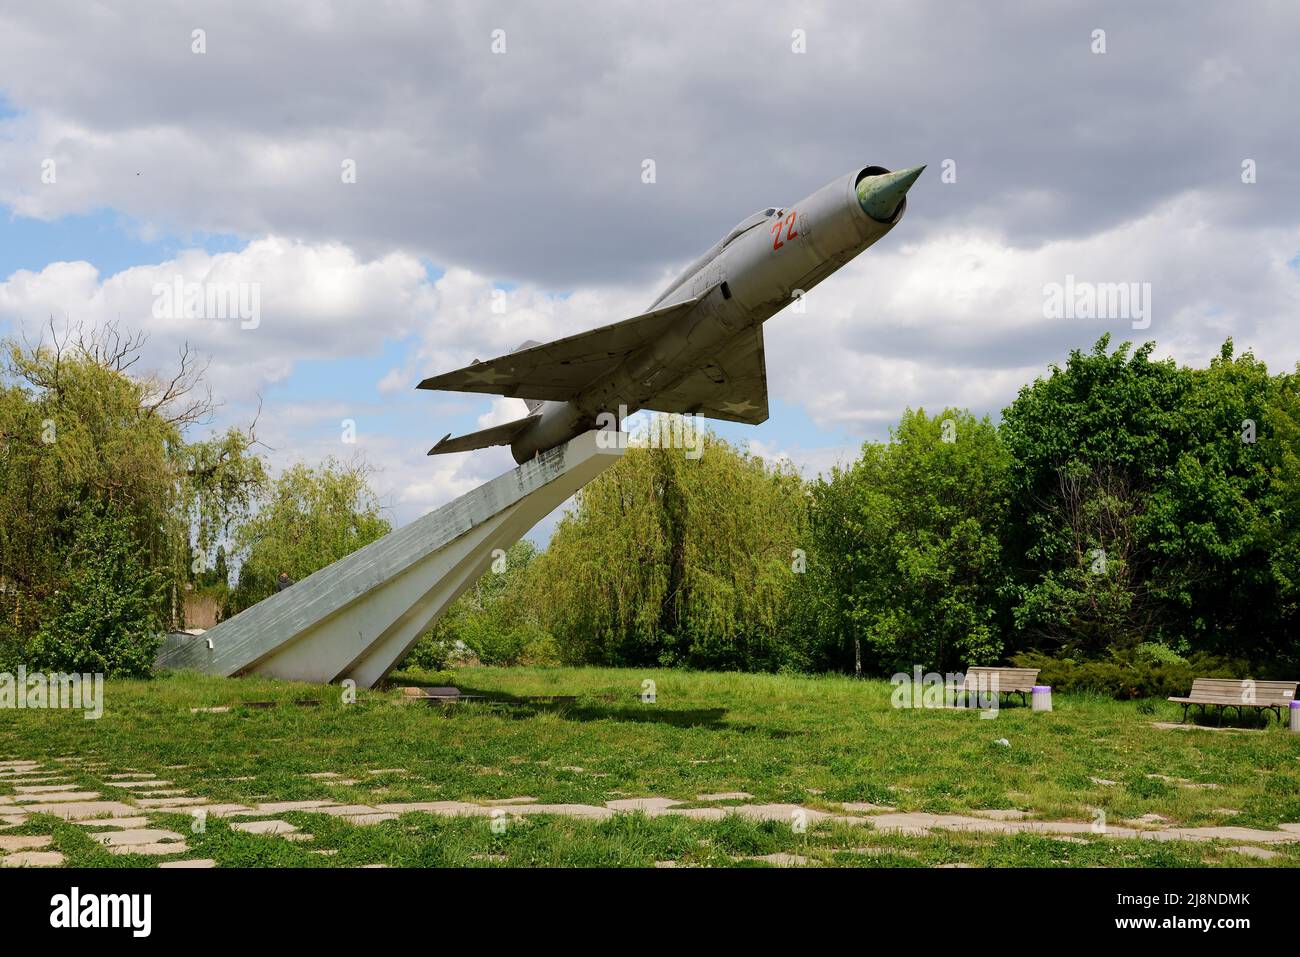 BILA TSERKVA, UKRAINE - MAY 15: The view on MIG-21 supersonic jet fighter and interceptor aircraft memorial dedicated to Soviet pilots who release of Stock Photo